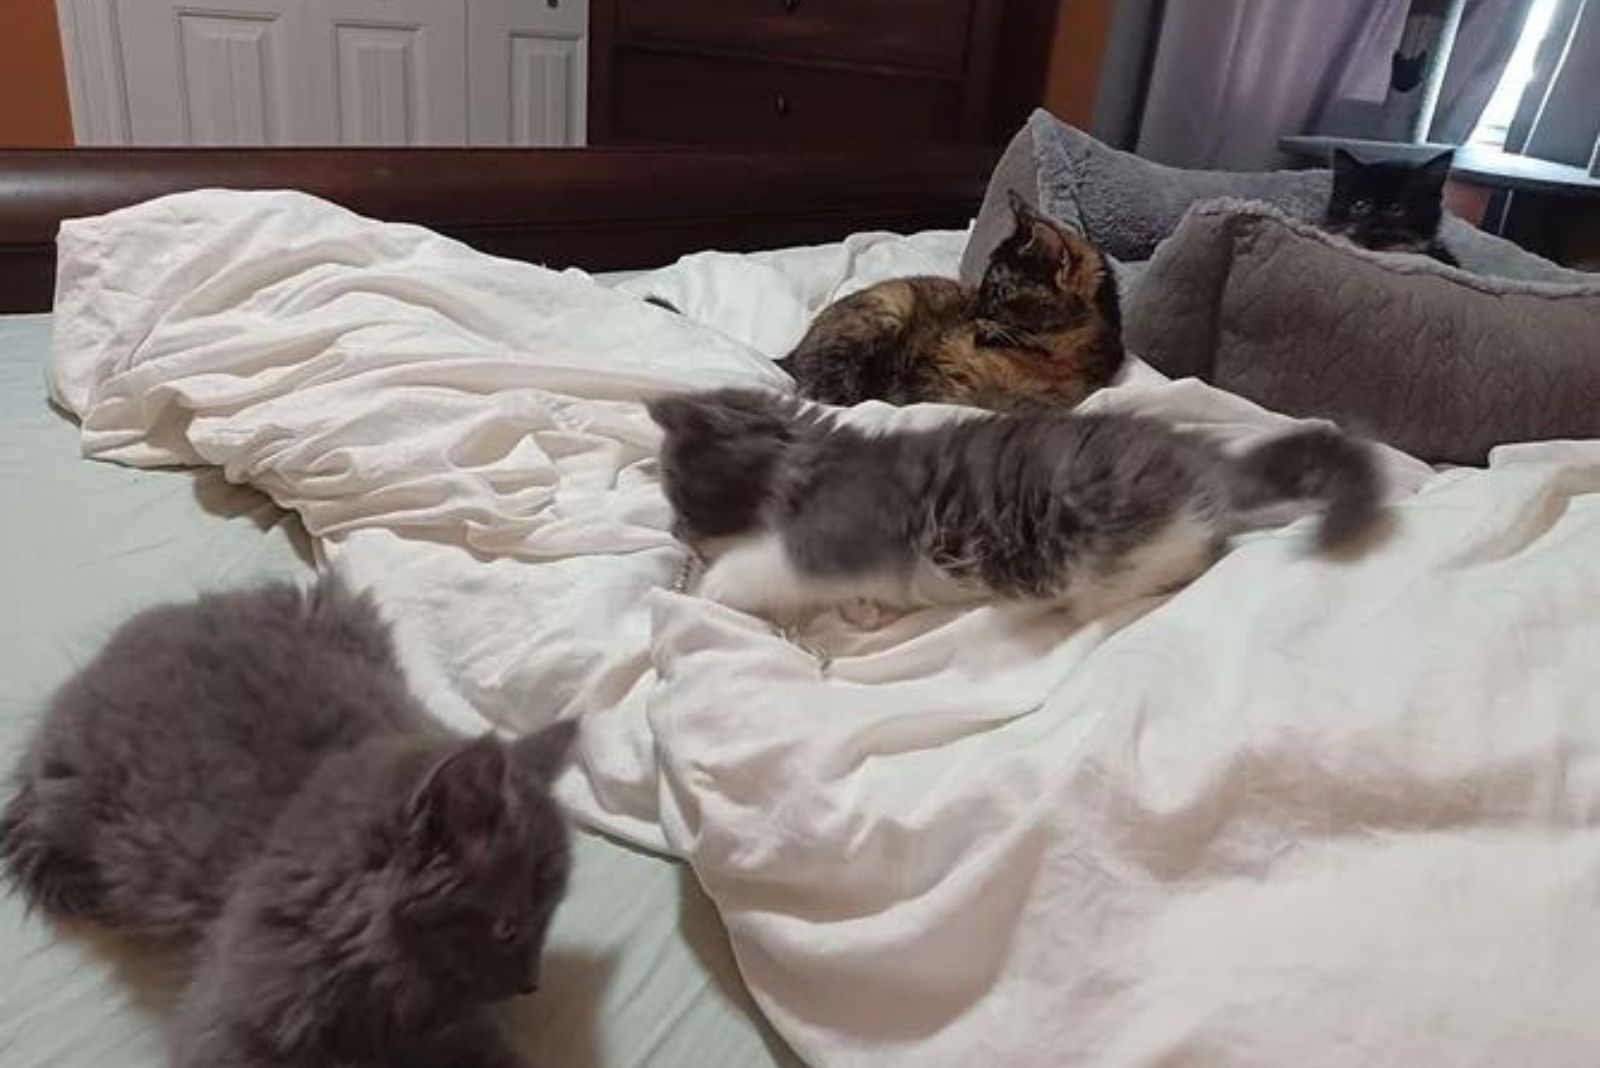 kittens with another cat on the bed